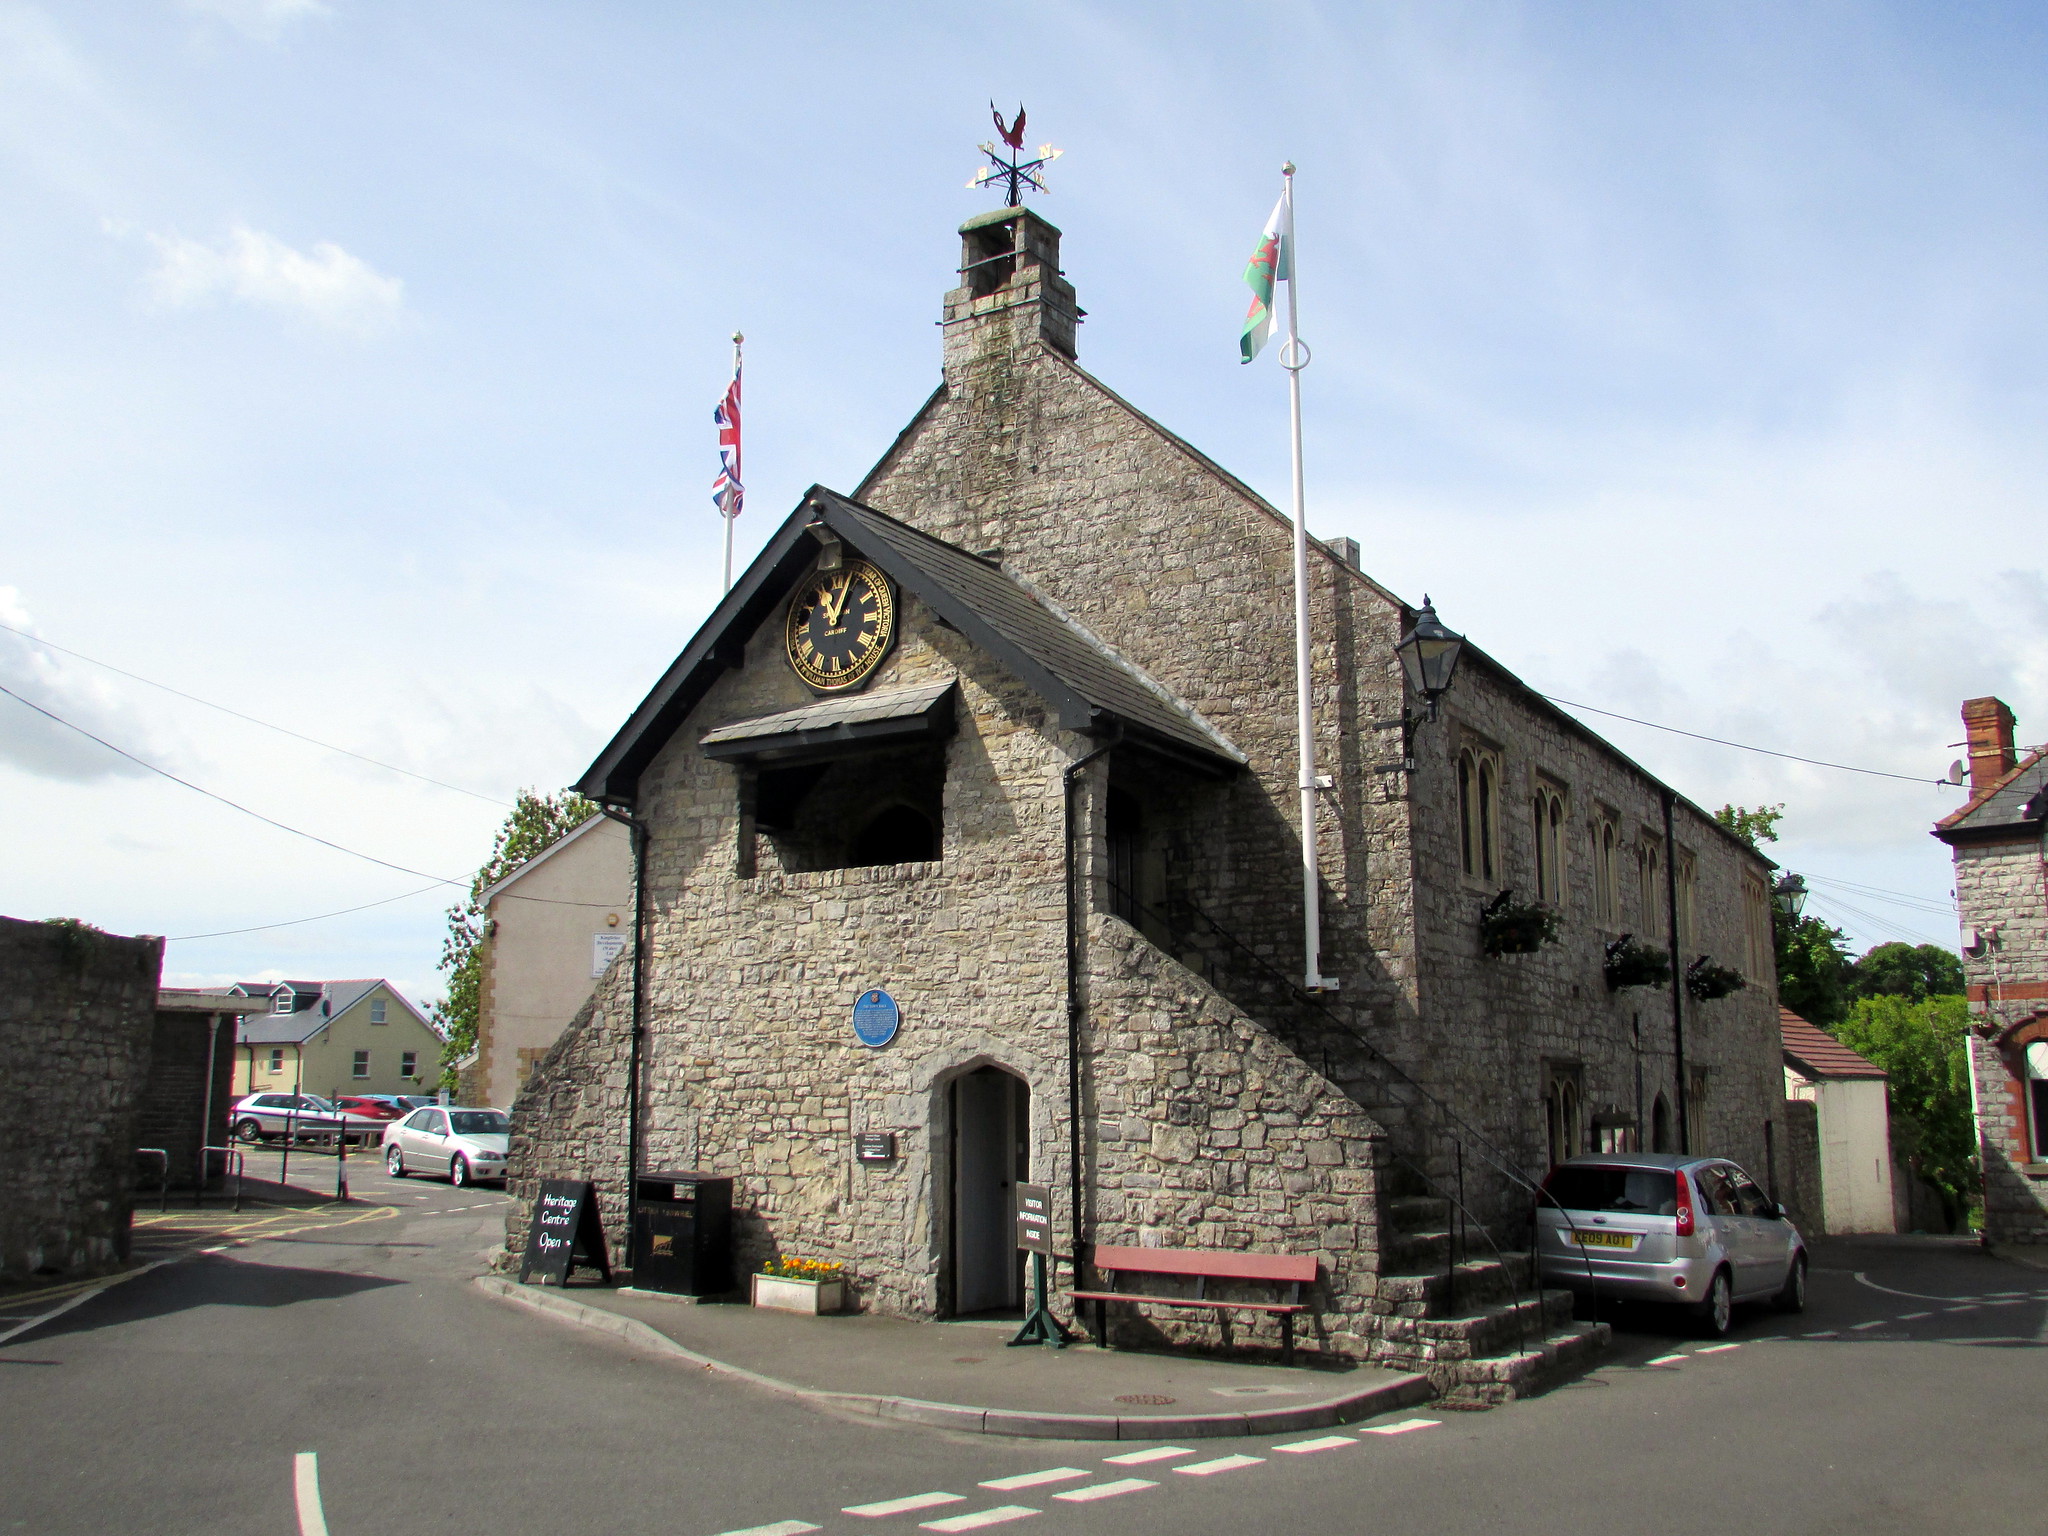 Llantwit Major Town Hall. Having settled in Wales, Claus Apel celebrates his adoptive community’s welcoming spirit, a year on from a rally against refugees in Llantwit Major that was met with a counterprotest.